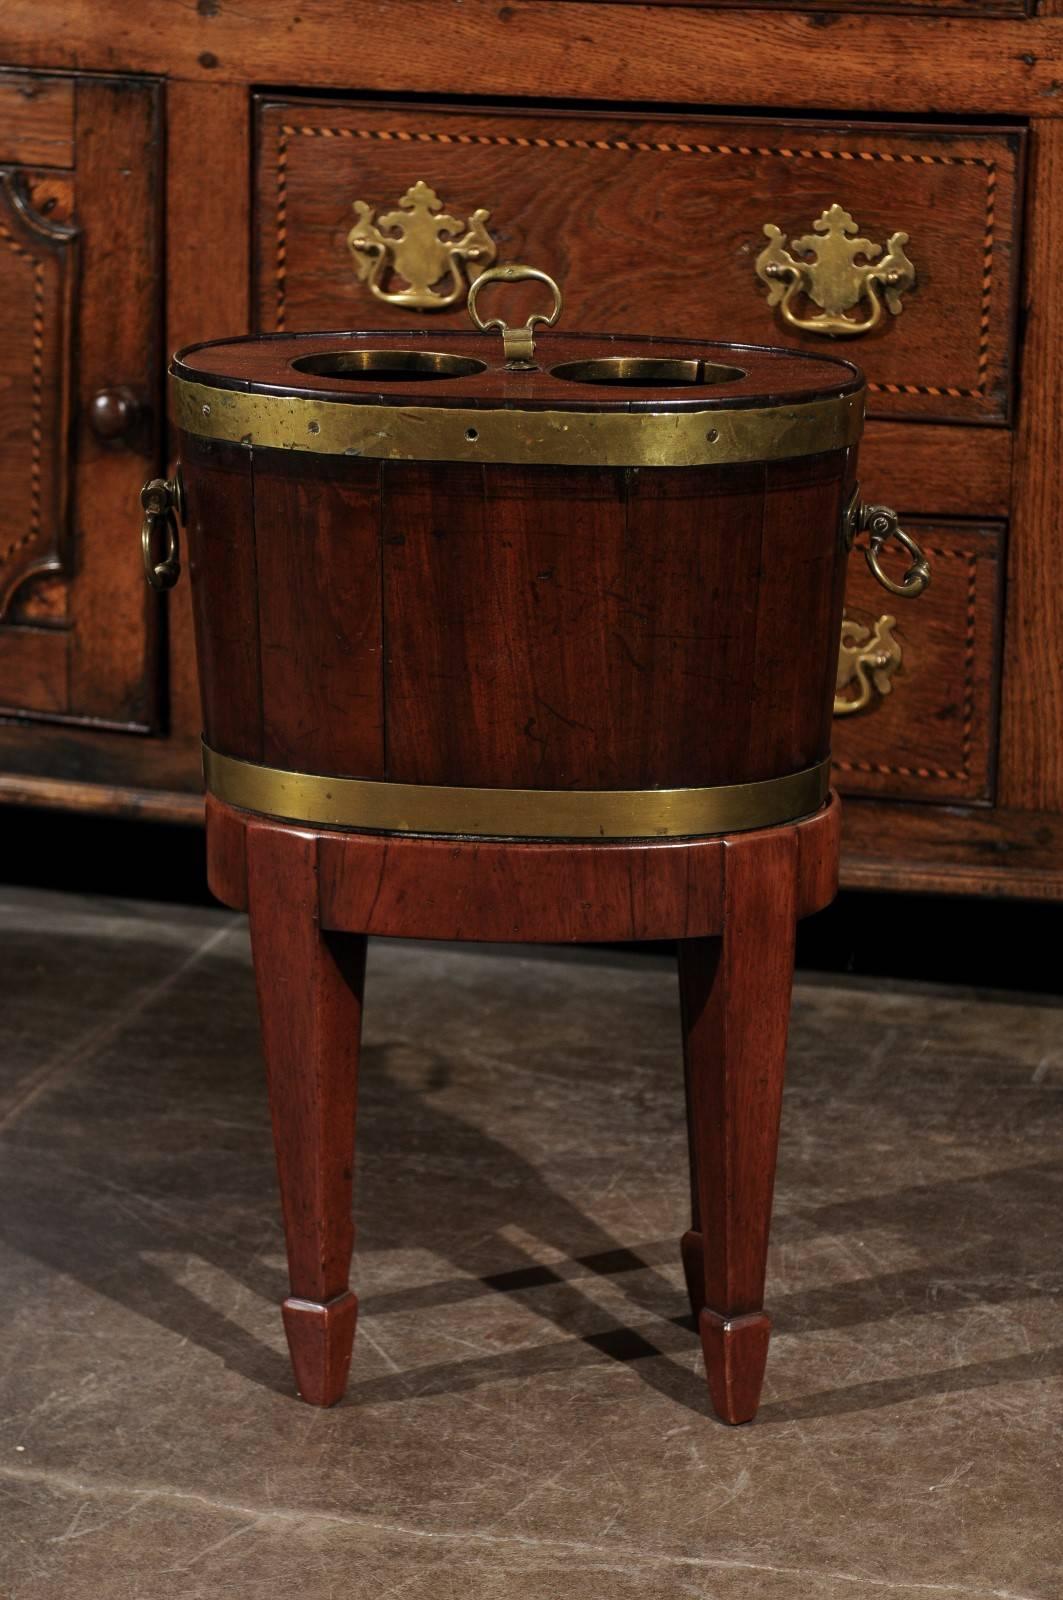 An English mahogany and brass wine cooler from the mid-19th century. This wood and brass wine cooler features a lead lining that would have kept wine or champagne cool. The top is made of a removable wooden cover with two circular holes cut-out from